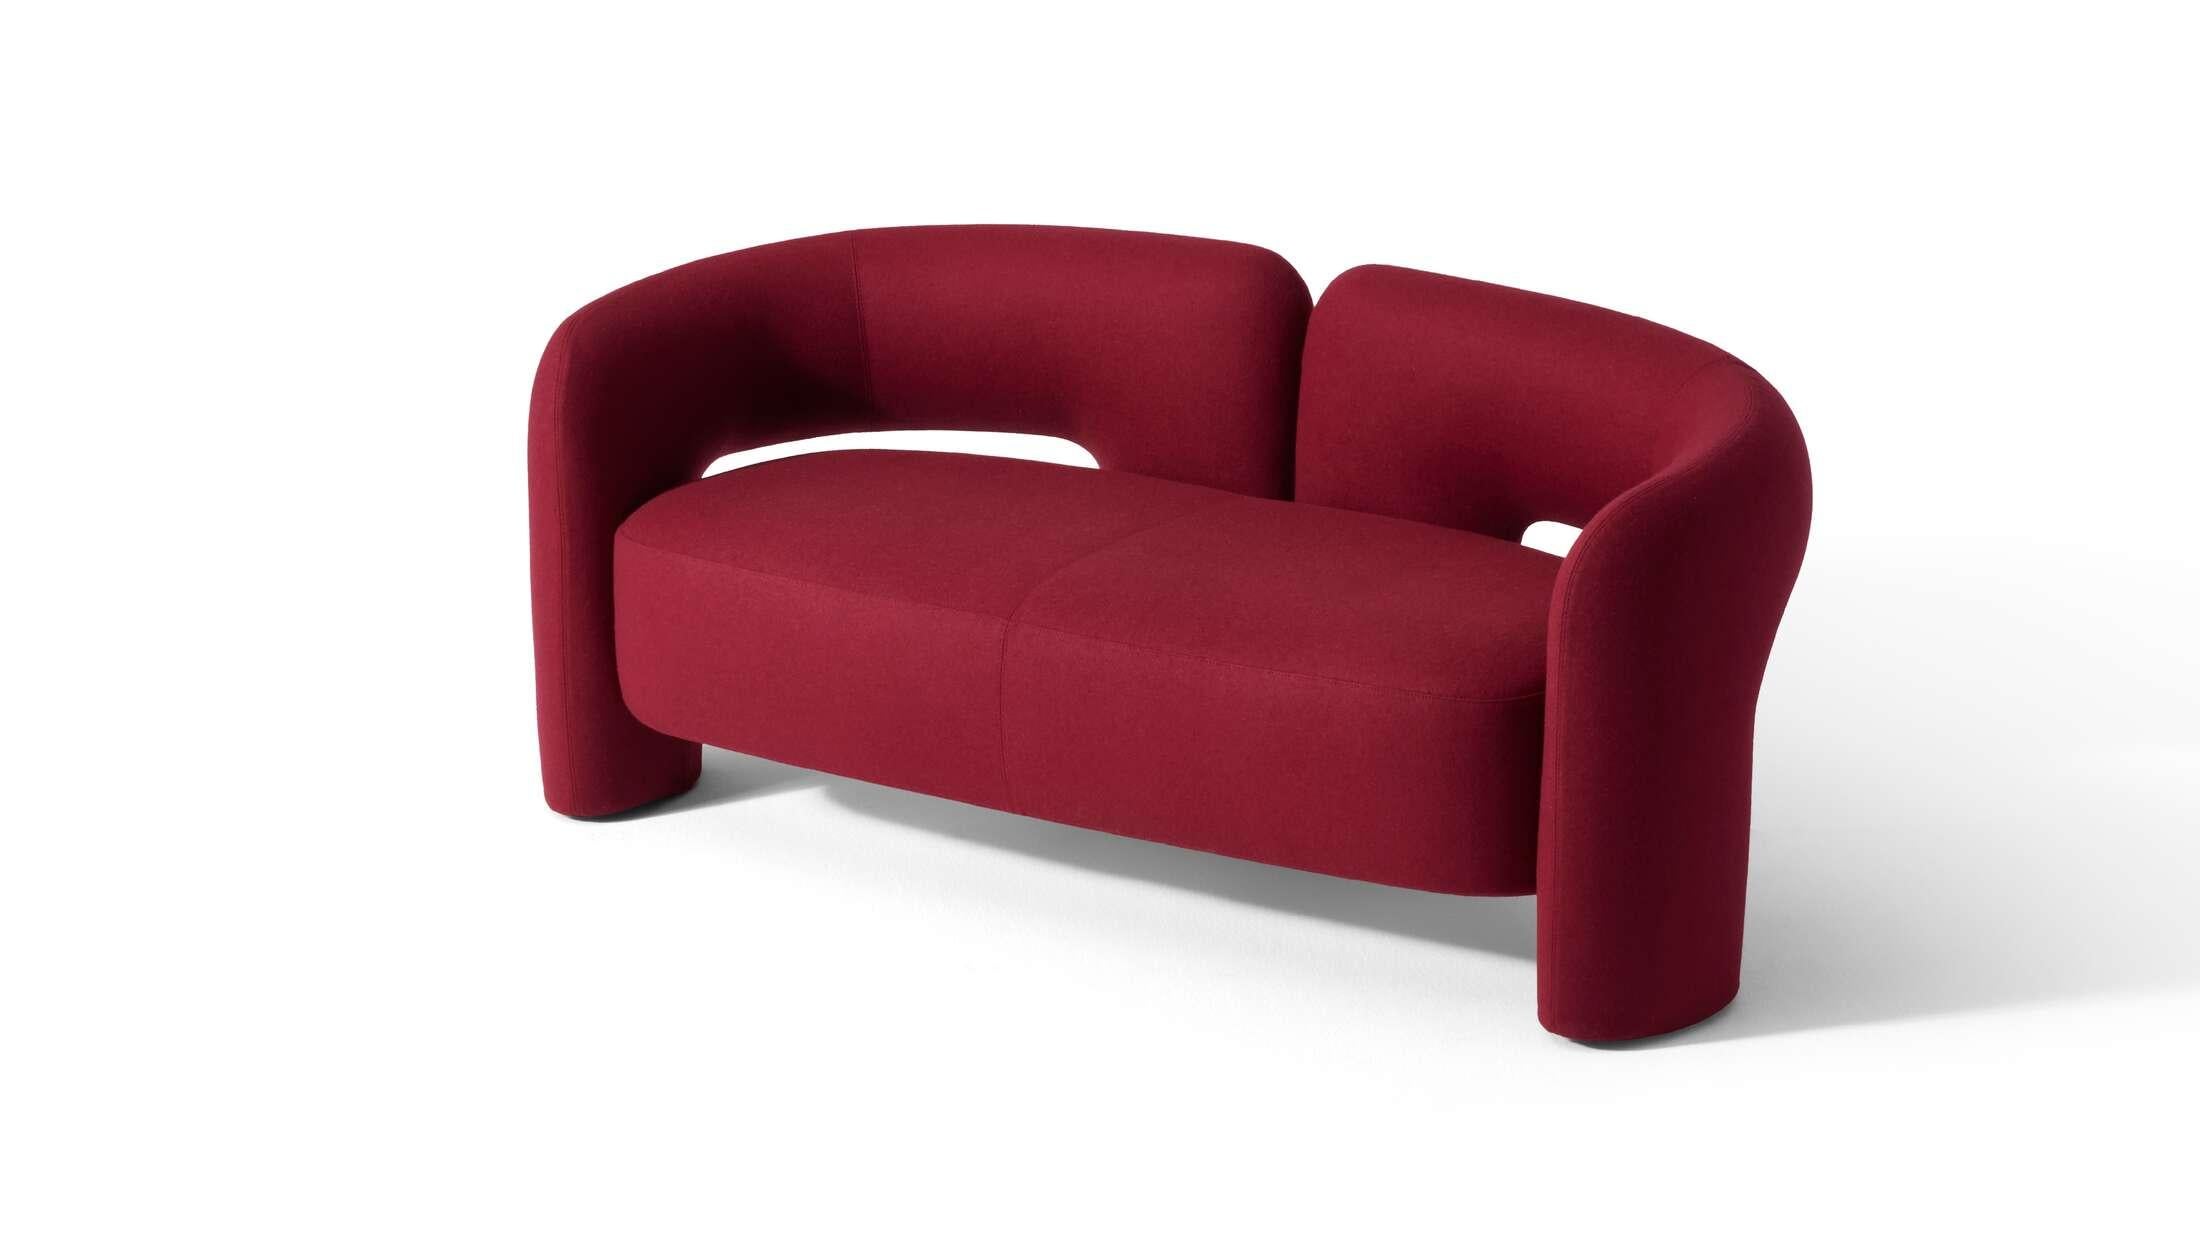 Patricia Urquiola Dudet Sofa
Manufactured by Cassina

70S-STYLE RELAXATION

Dudet transfers to a two-seat settee the versatile, sophisticated design of the chair in the same family designed by Patricia Urquiola.

Available in one size only, the